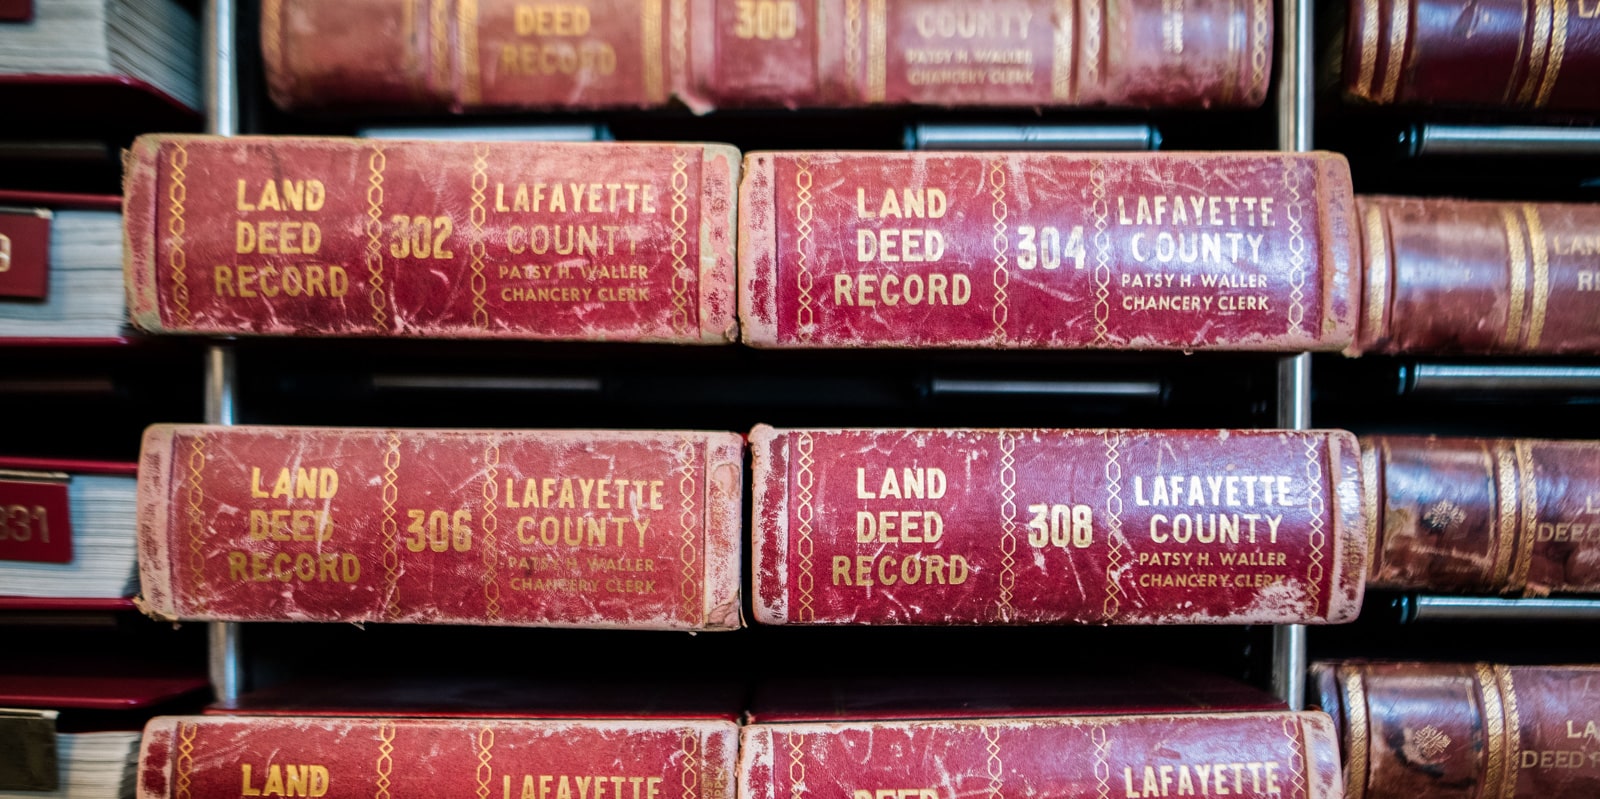 Land deed record